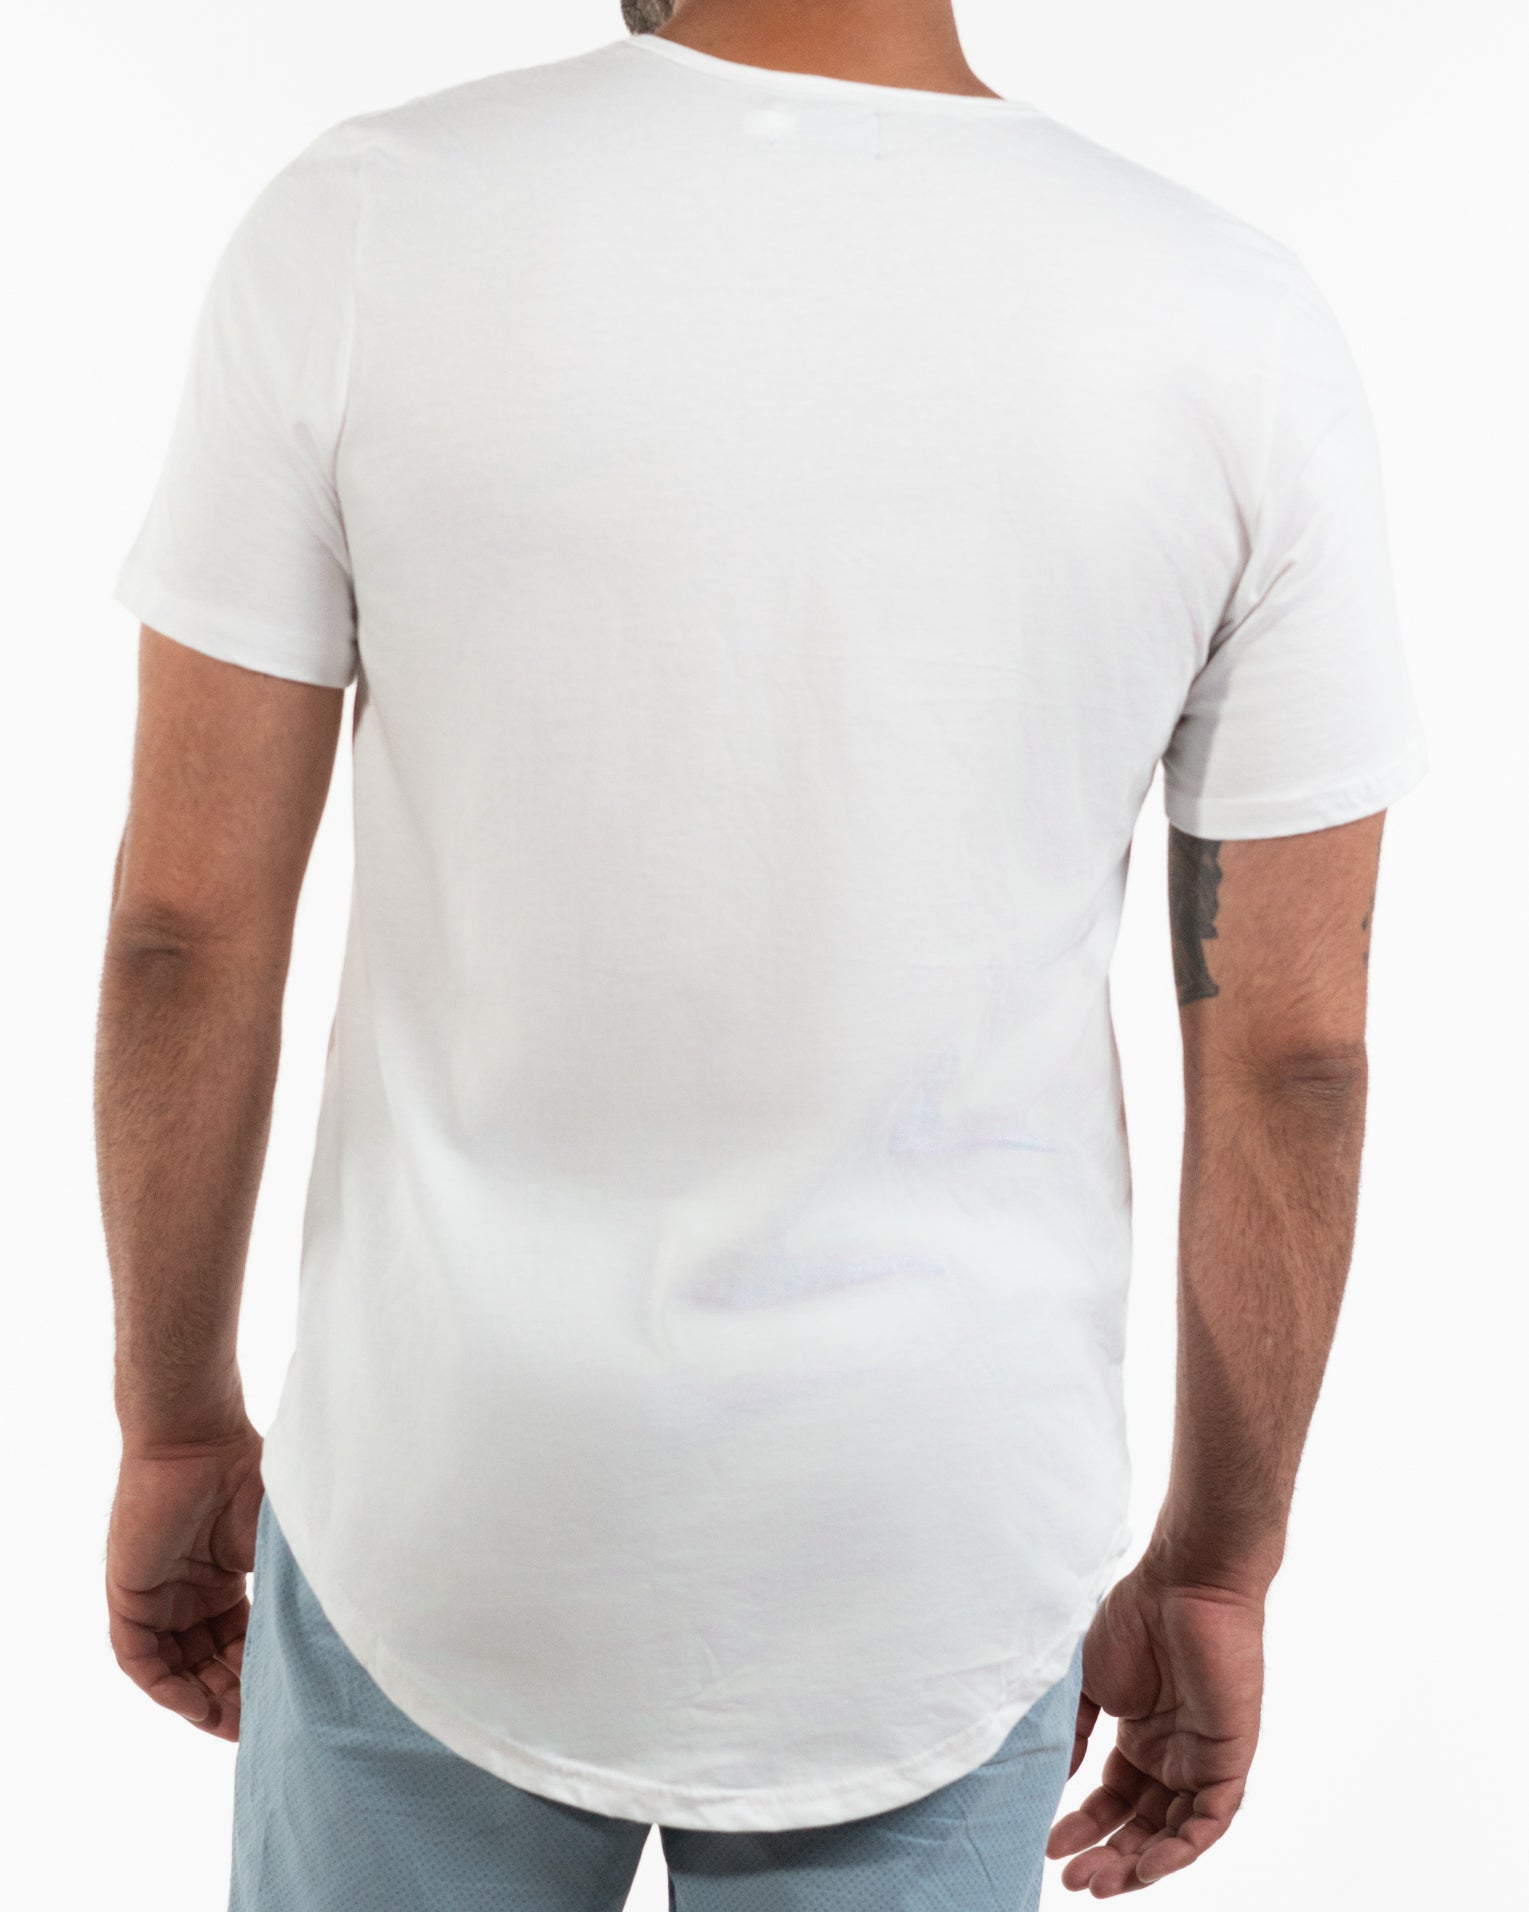 The Pauli / White Low Cut T-shirt with Topical Huglife